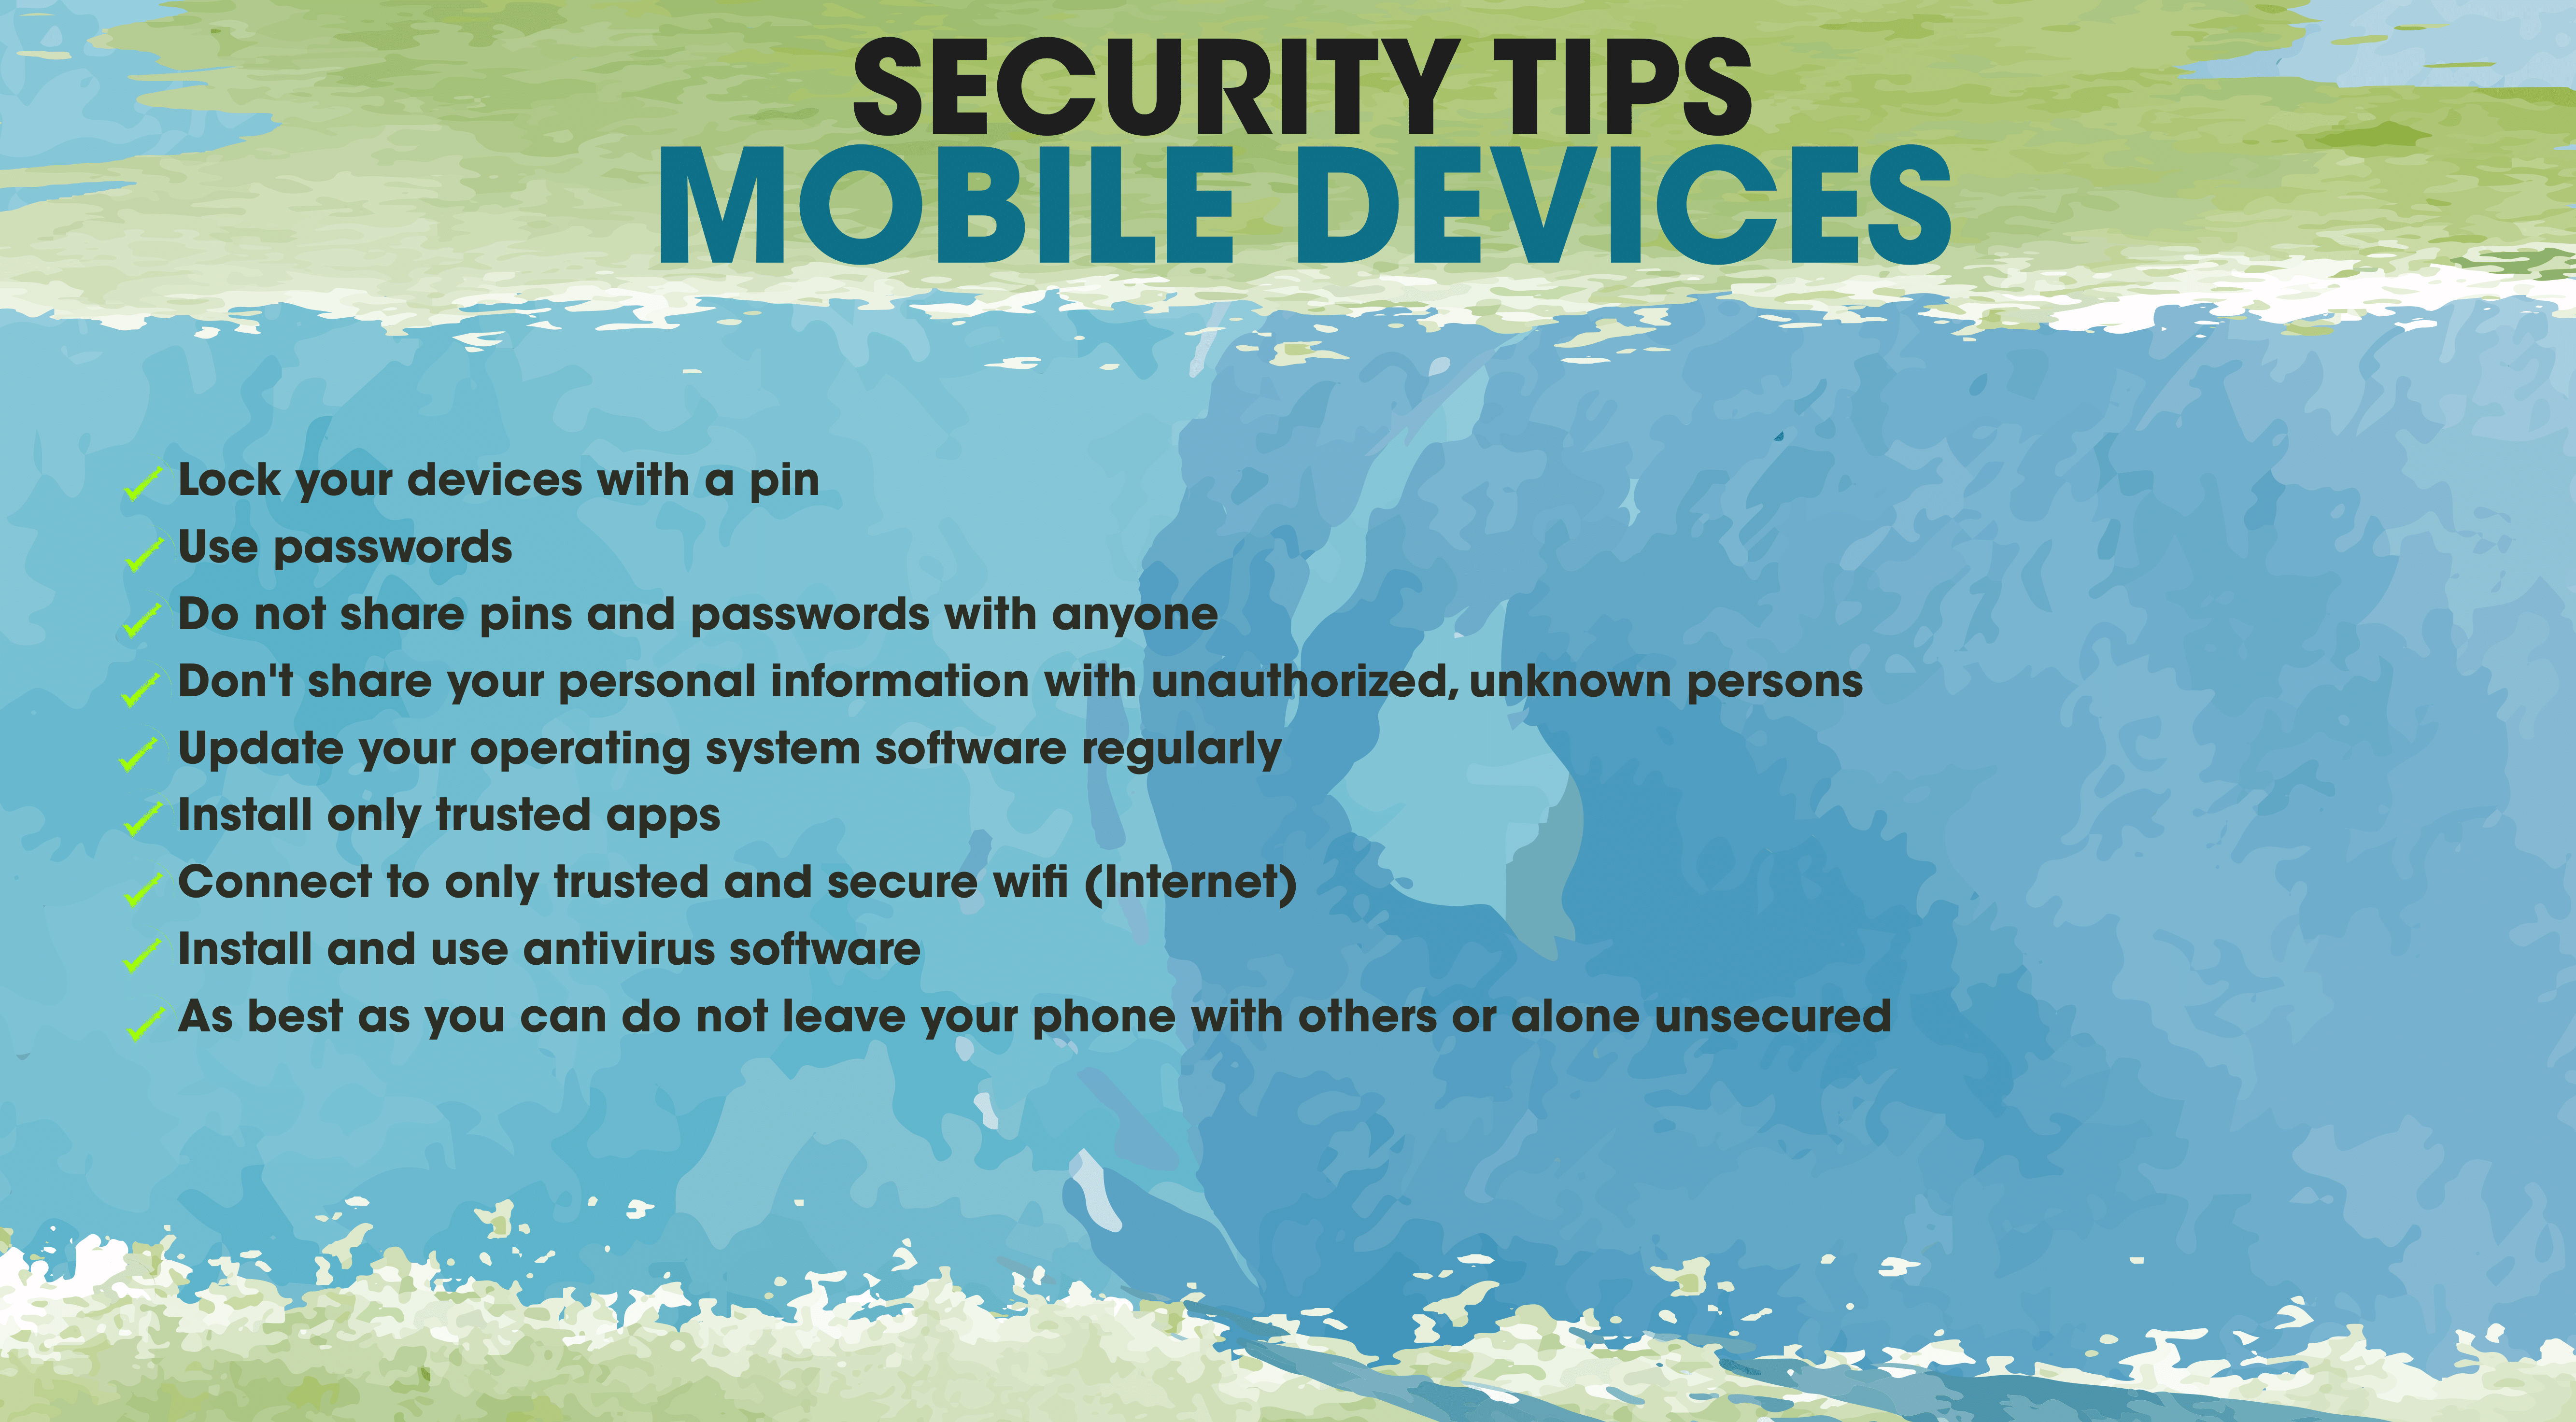 Graphic showing security tips for mobile devices